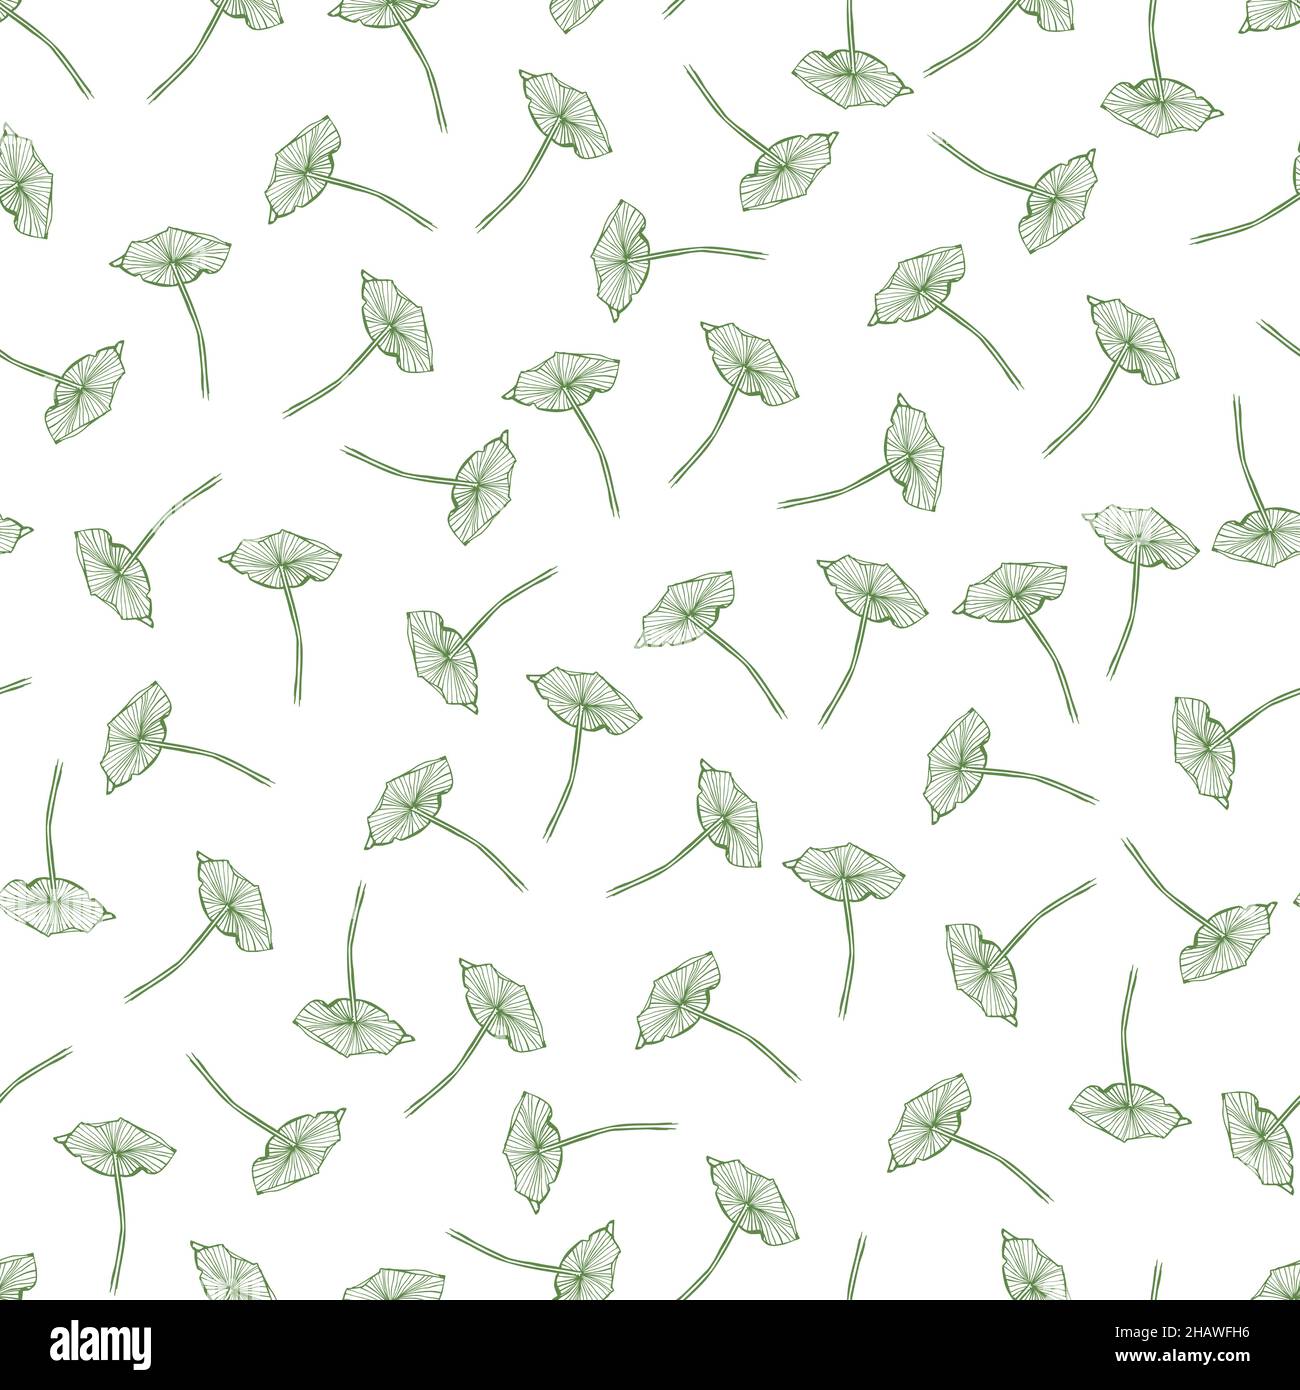 Delicate Illustrated Green Vines Rows Foliage Leaves Fabric by